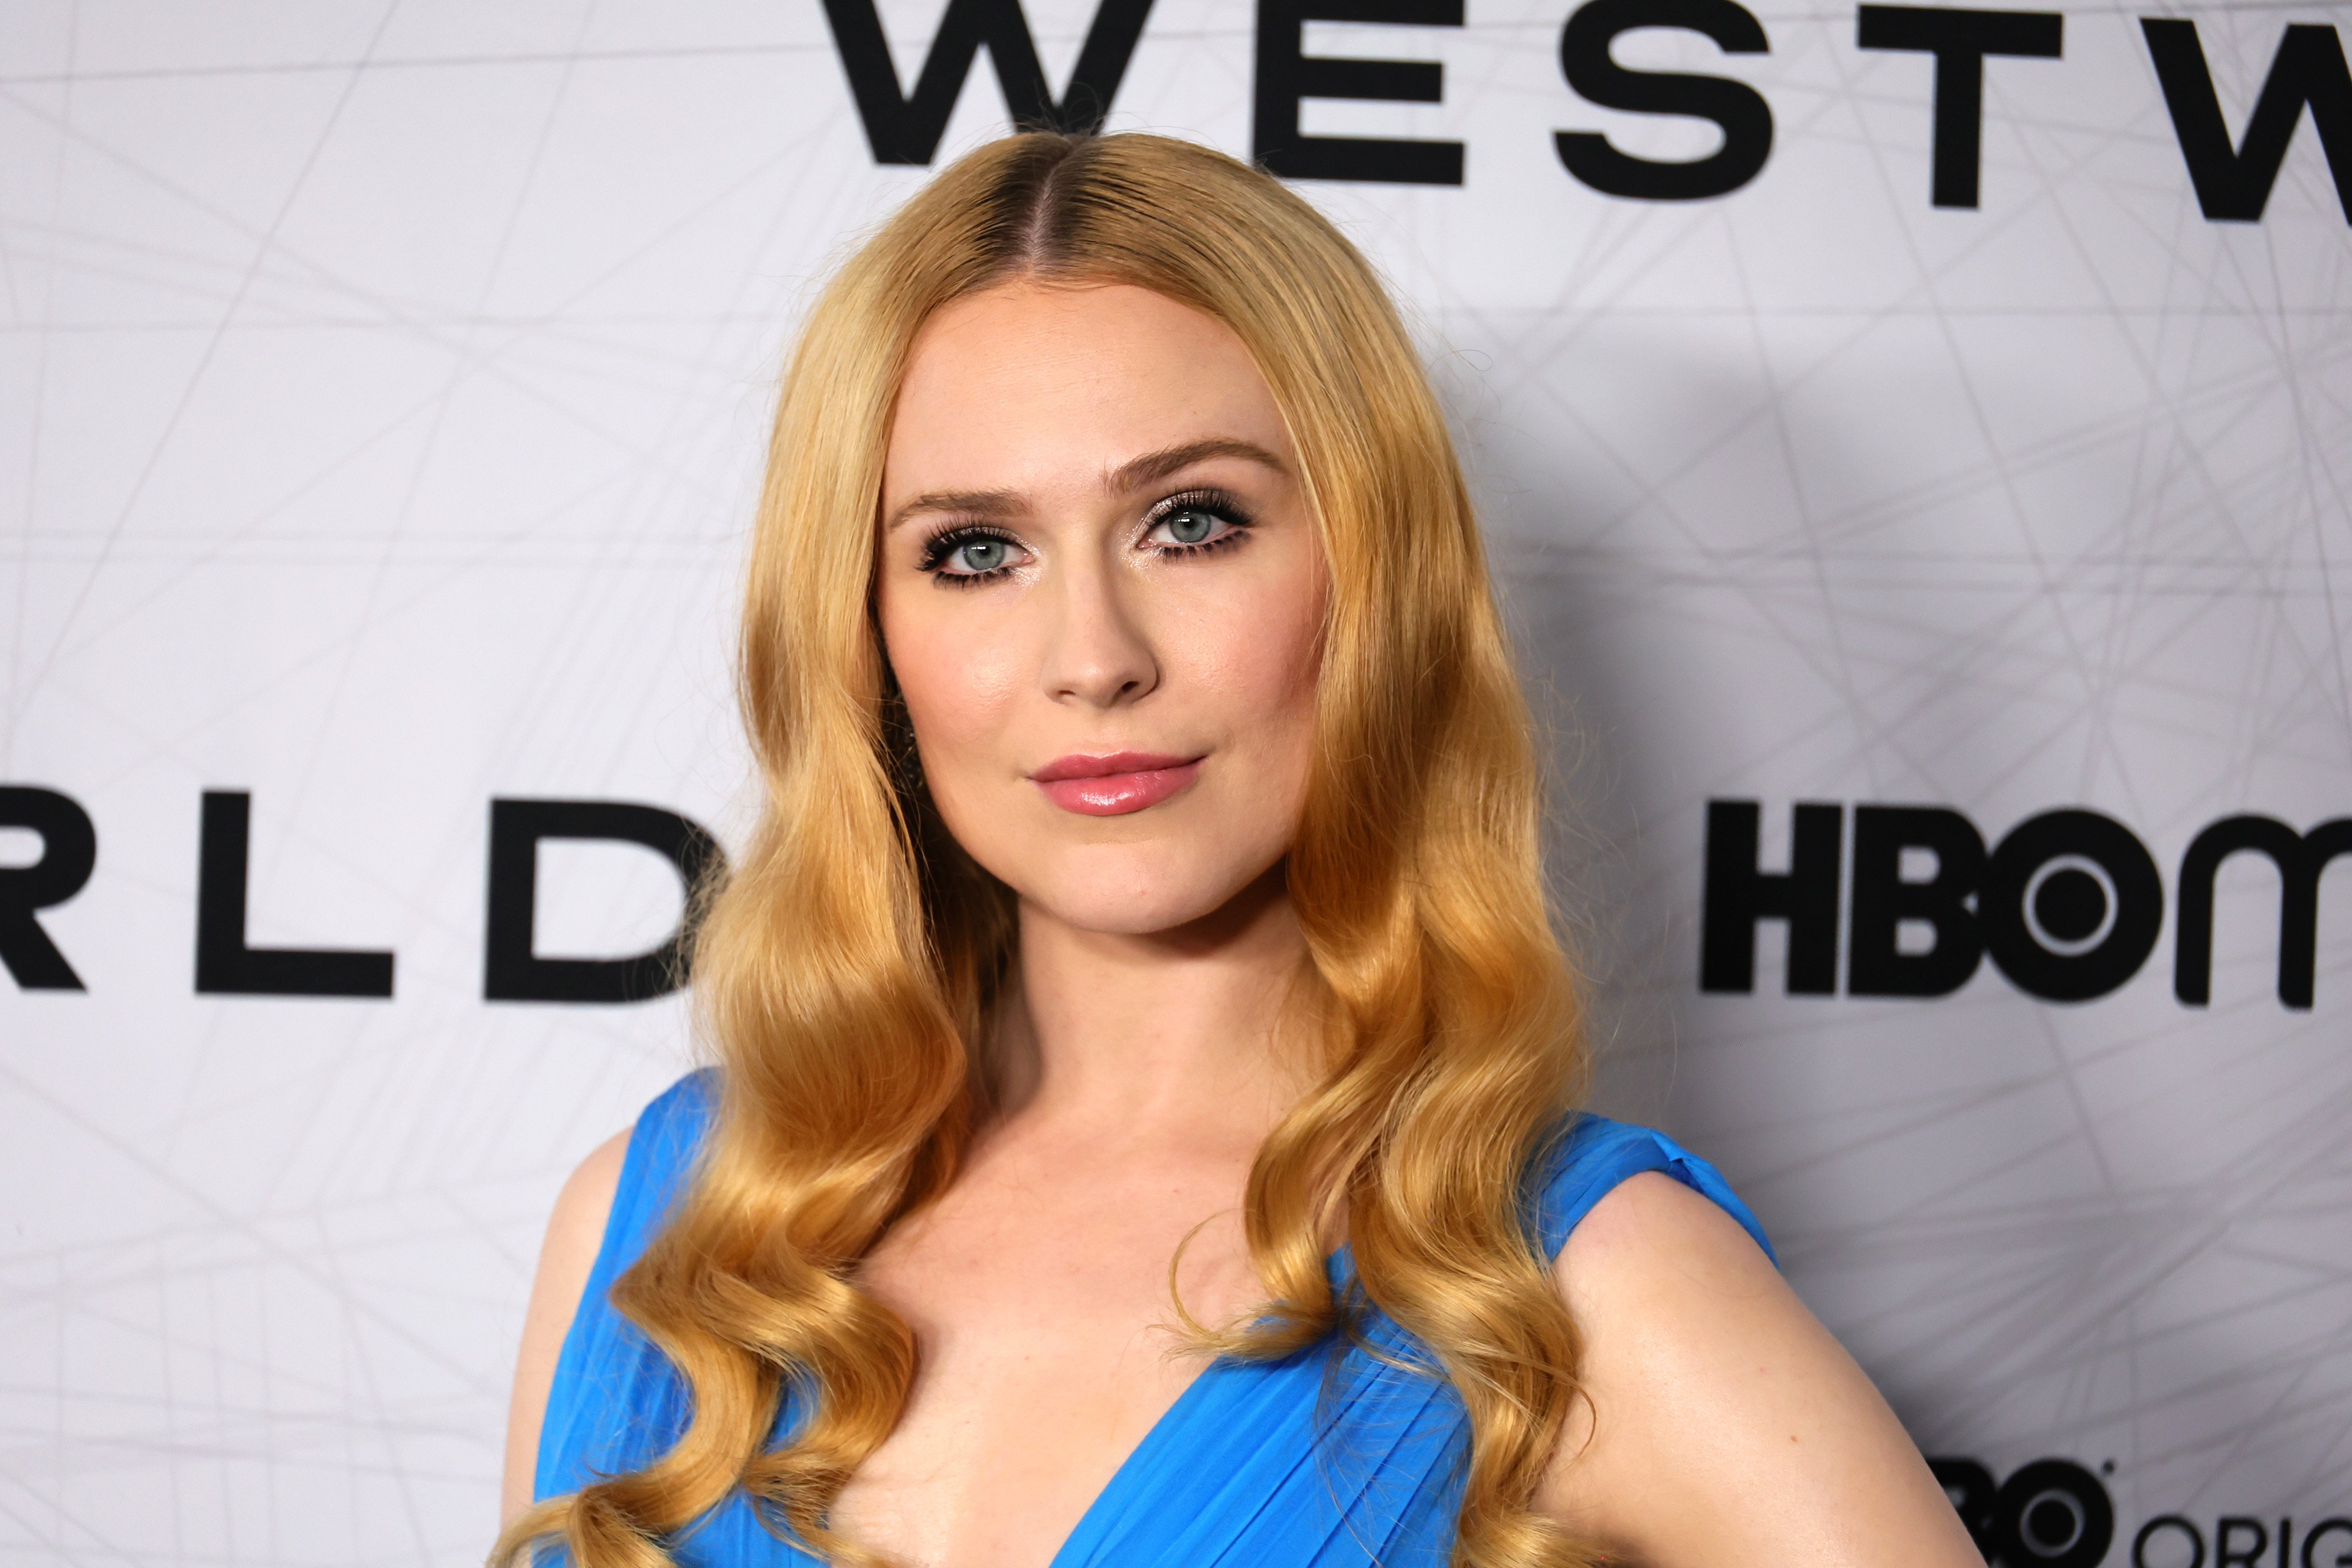 Evan Rachel Wood attends HBO's "Westworld" Season 4 Premiere at Alice Tully Hall, Lincoln Center on June 21, 2022, in New York City. I Source: Getty Images